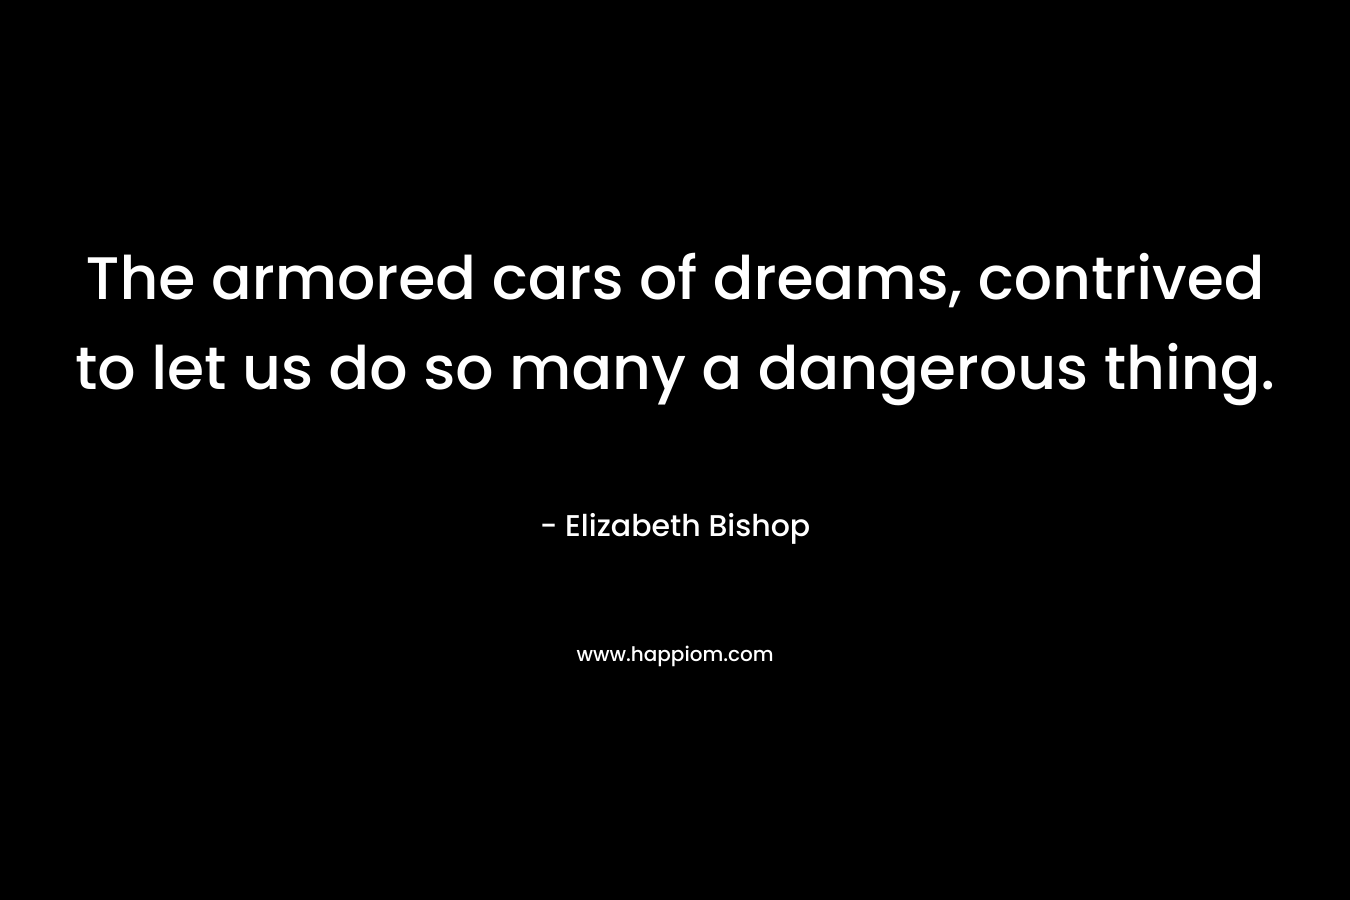 The armored cars of dreams, contrived to let us do so many a dangerous thing.